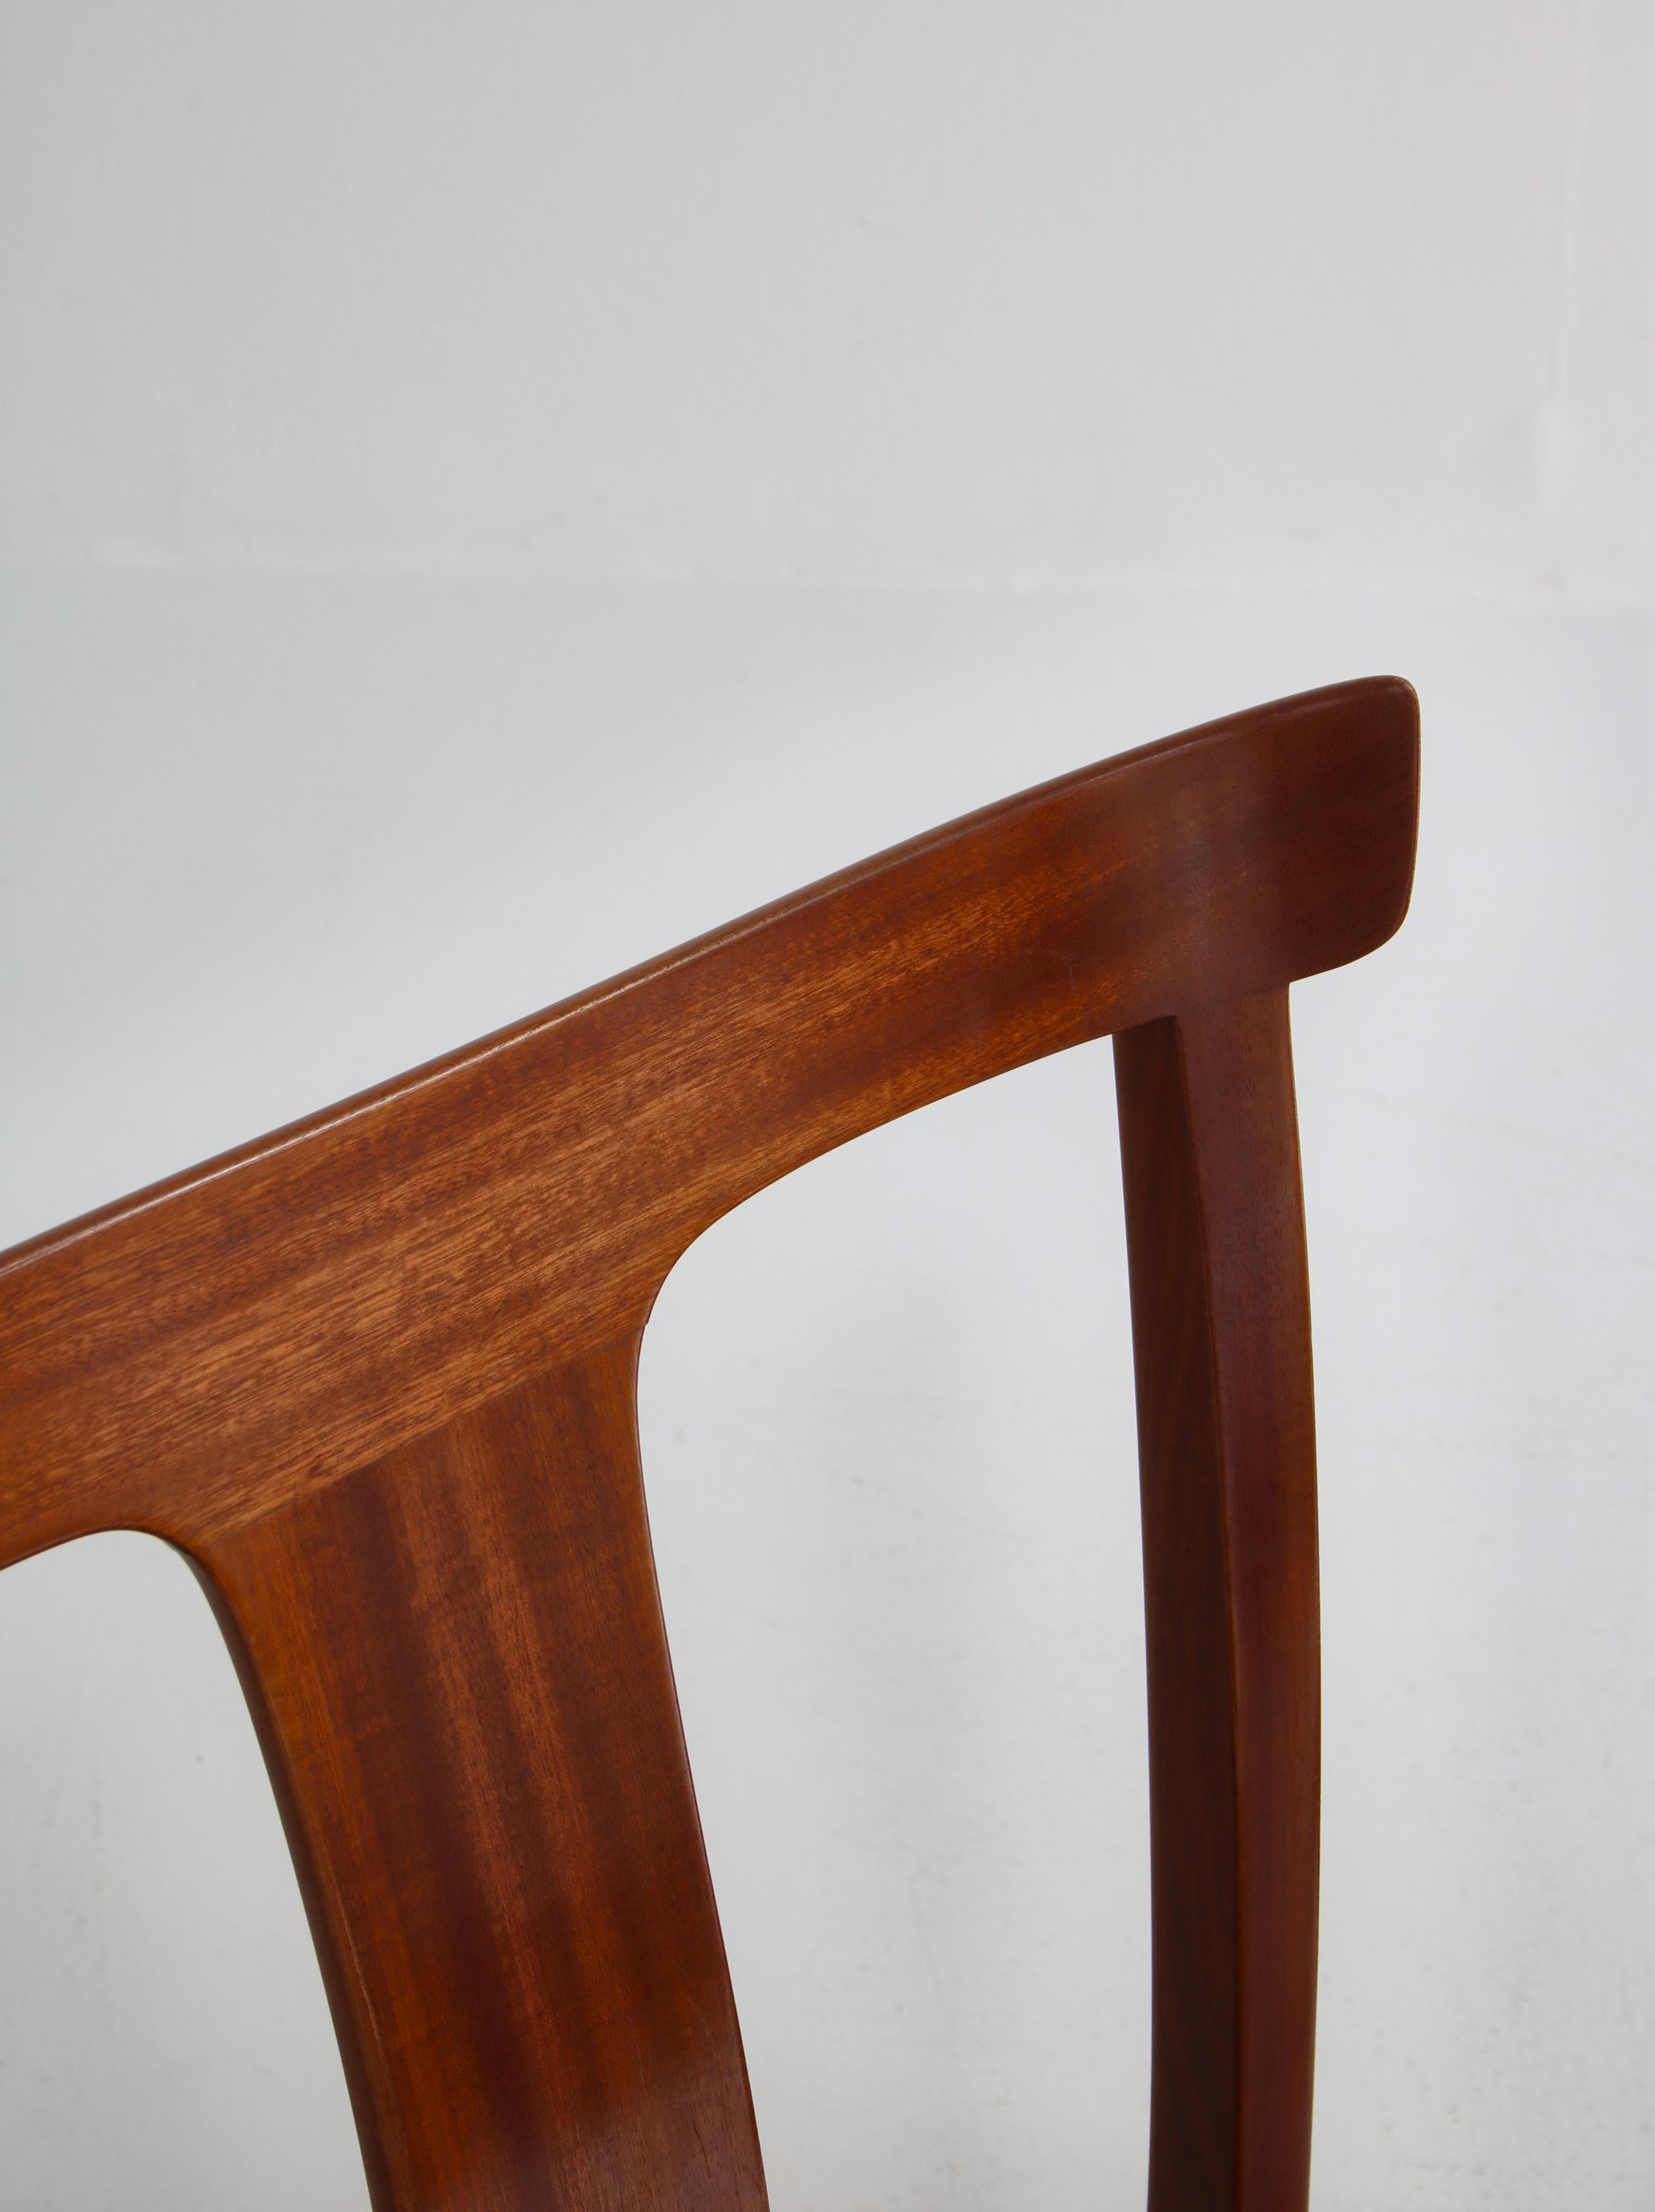 Ole Wanscher Dining Chairs in Mahogany and Horsehair Made by A.J. Iversen, 1960s For Sale 5